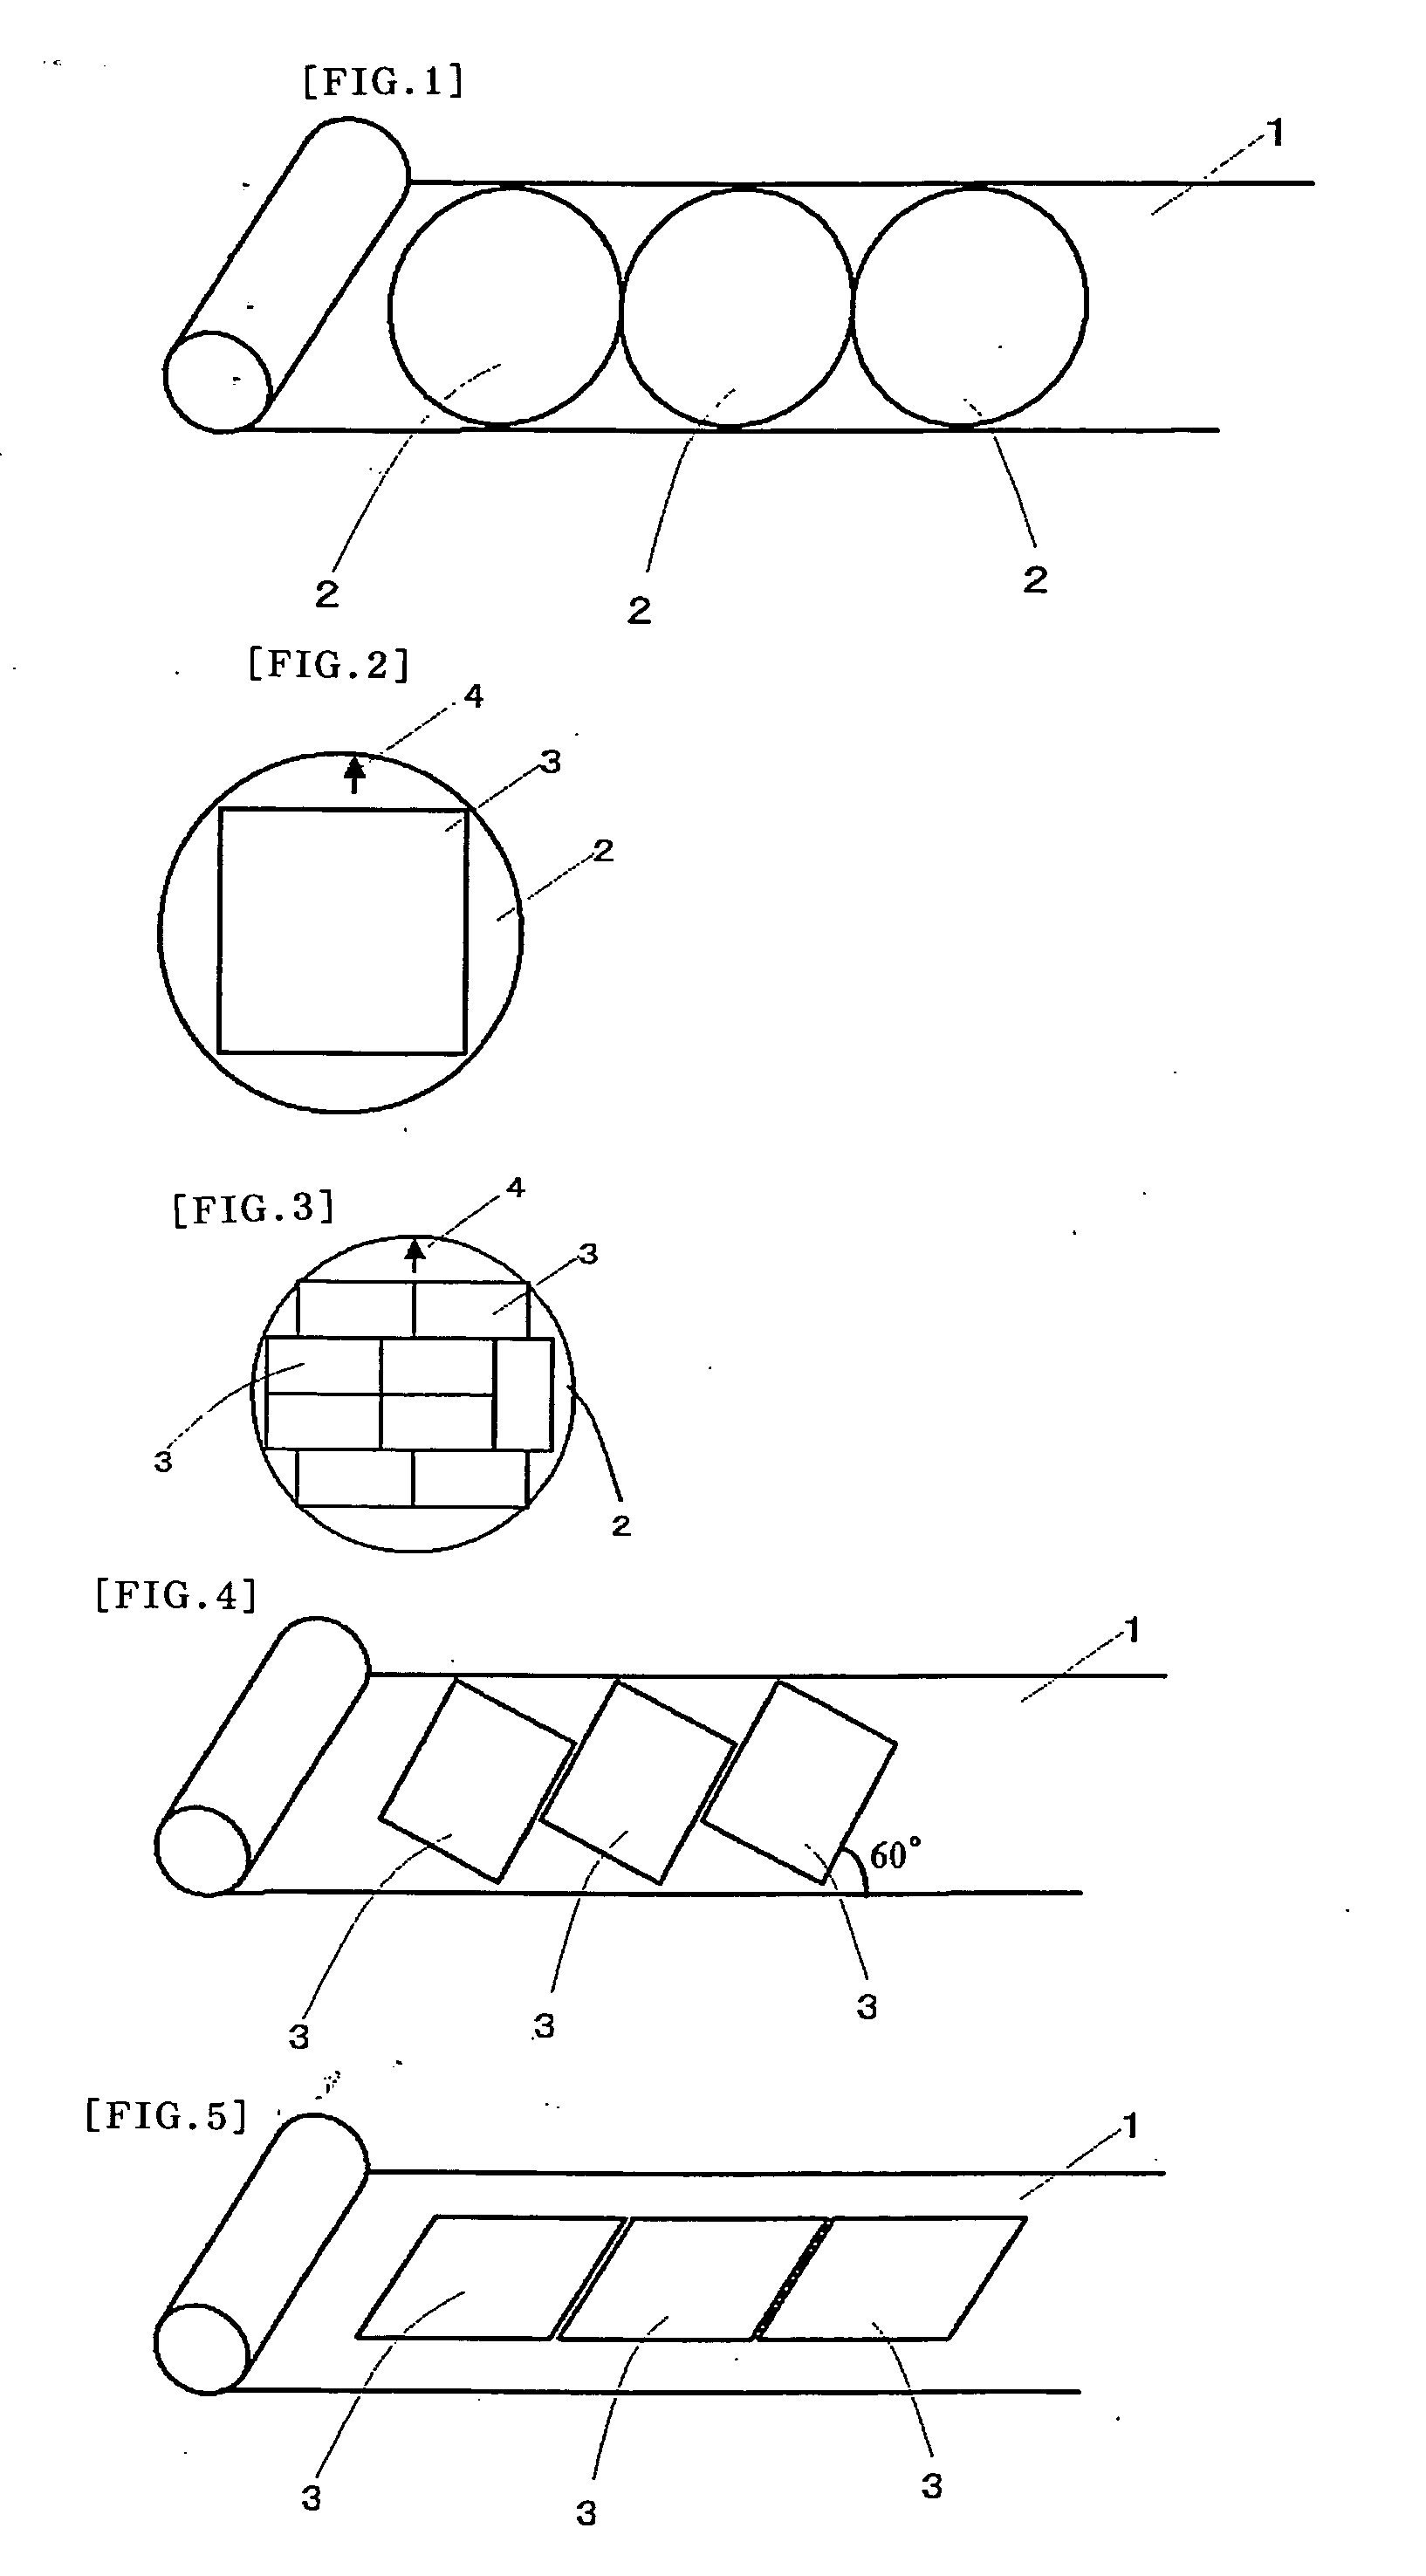 Optical Member, Method Of Manufacture Thereof, And Image Display Therewith